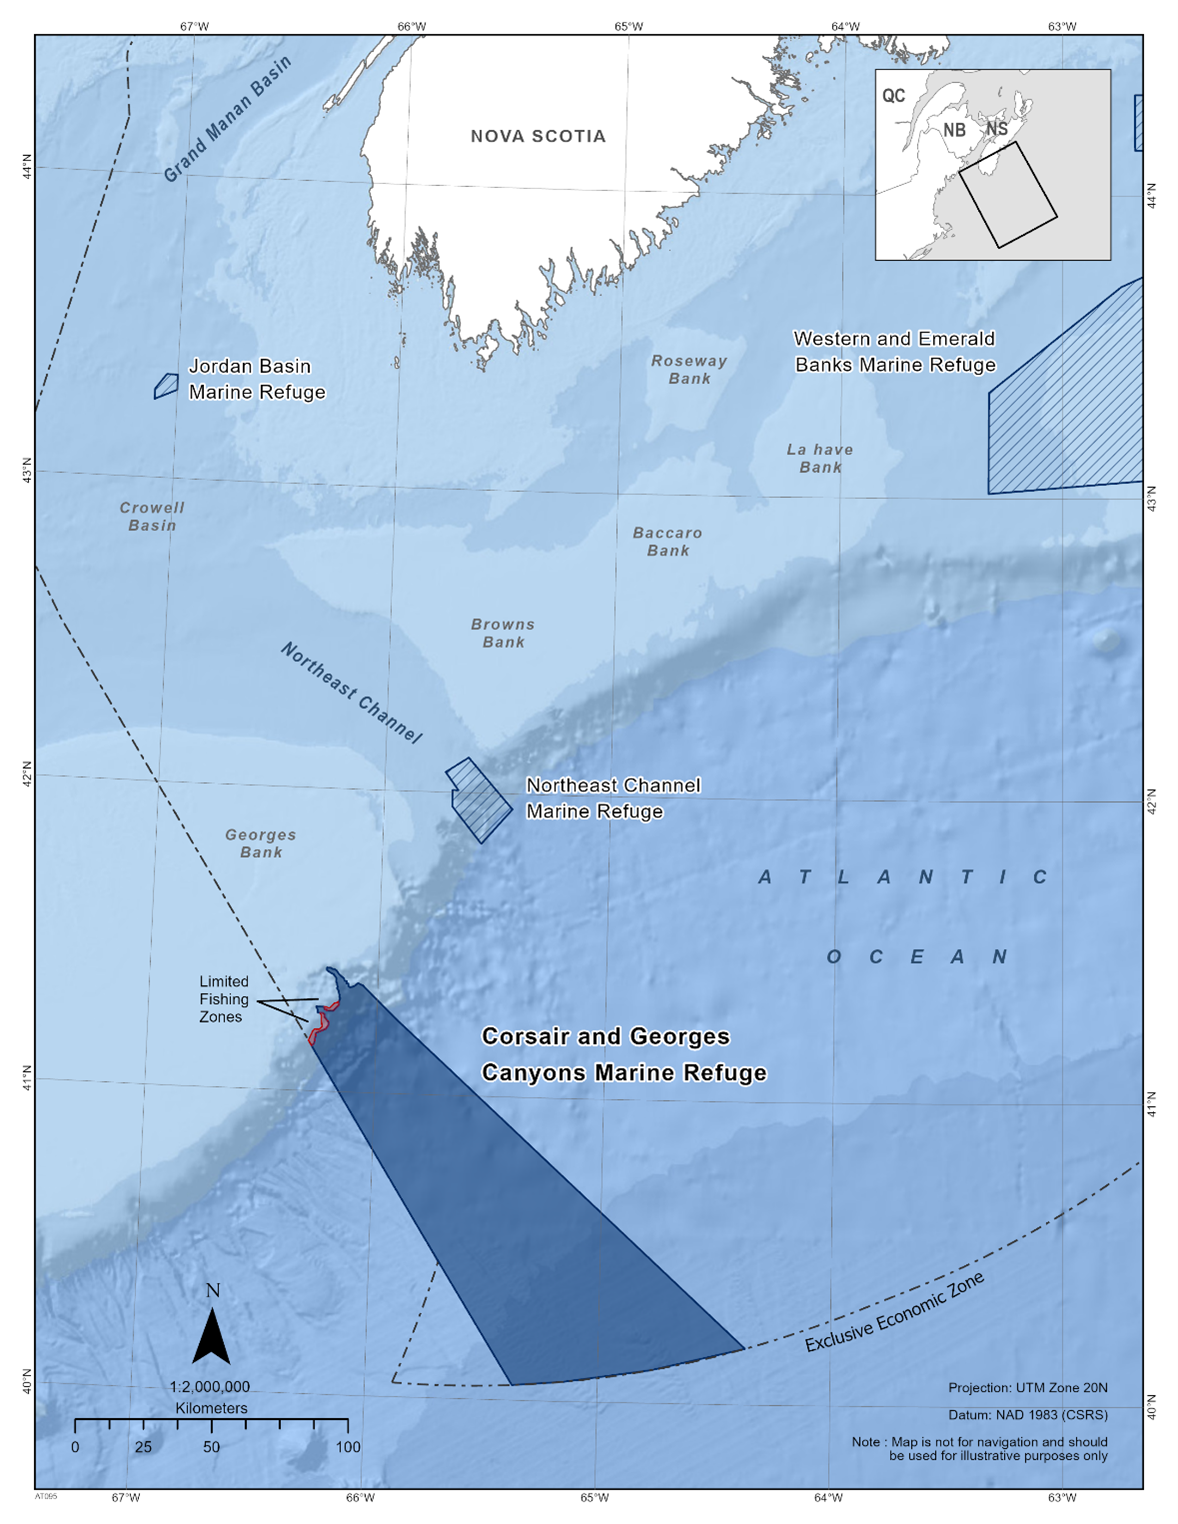 Map of the Corsair and Georges Canyon Conservation Area in dark blue. The map also includes the other marine refuges in dark blue diagonal lines (Jordan Basin Marine Refuge, Western and Emerald Banks Marine Refuge, Northeast Channel Marine Refuge). 